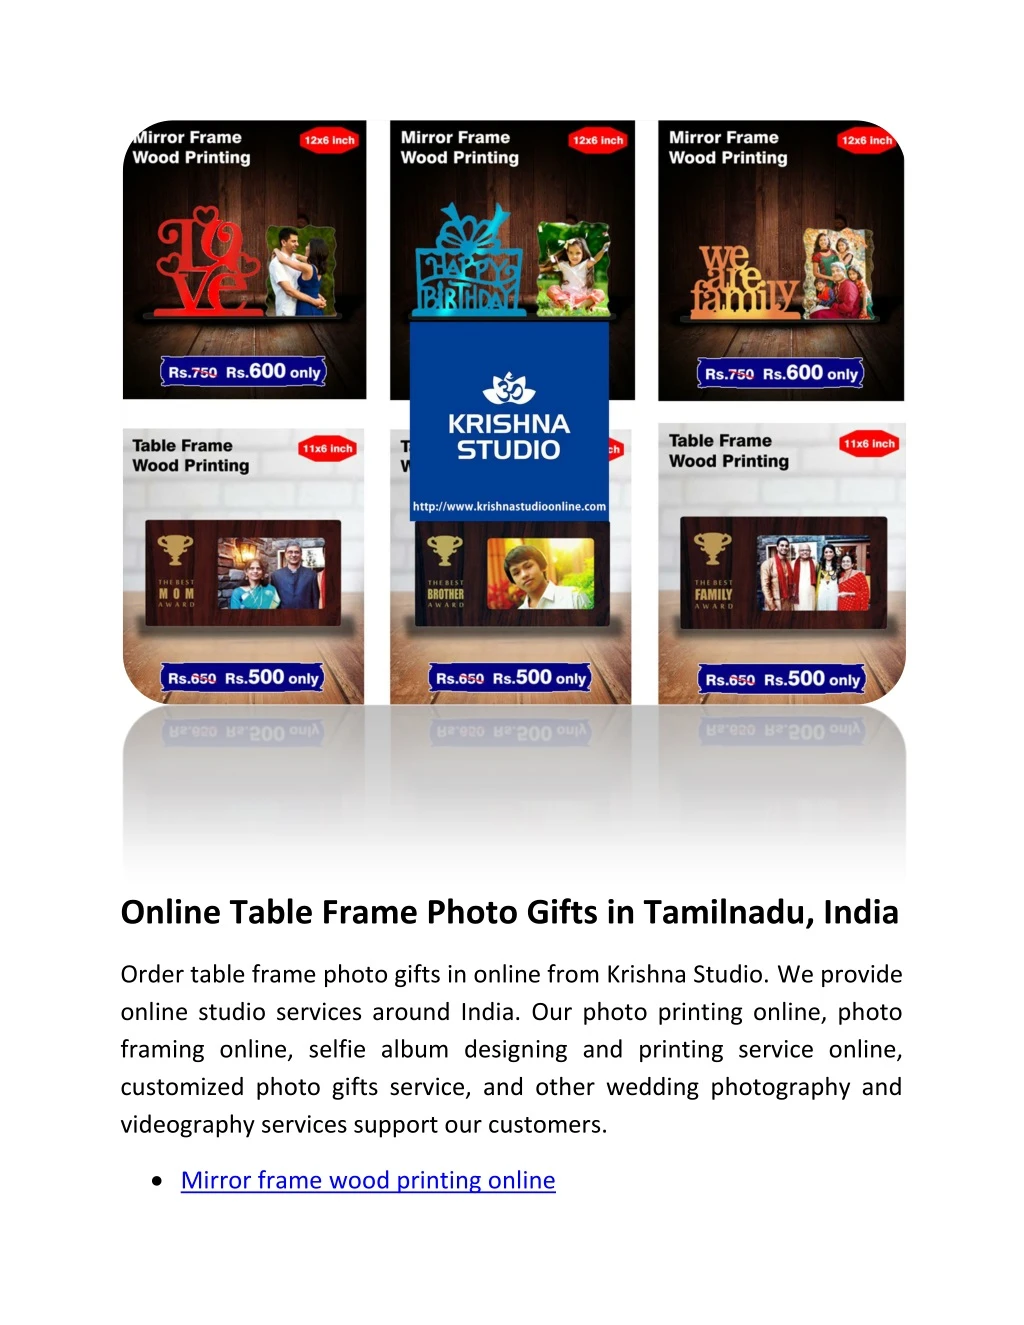 online table frame photo gifts in tamilnadu india